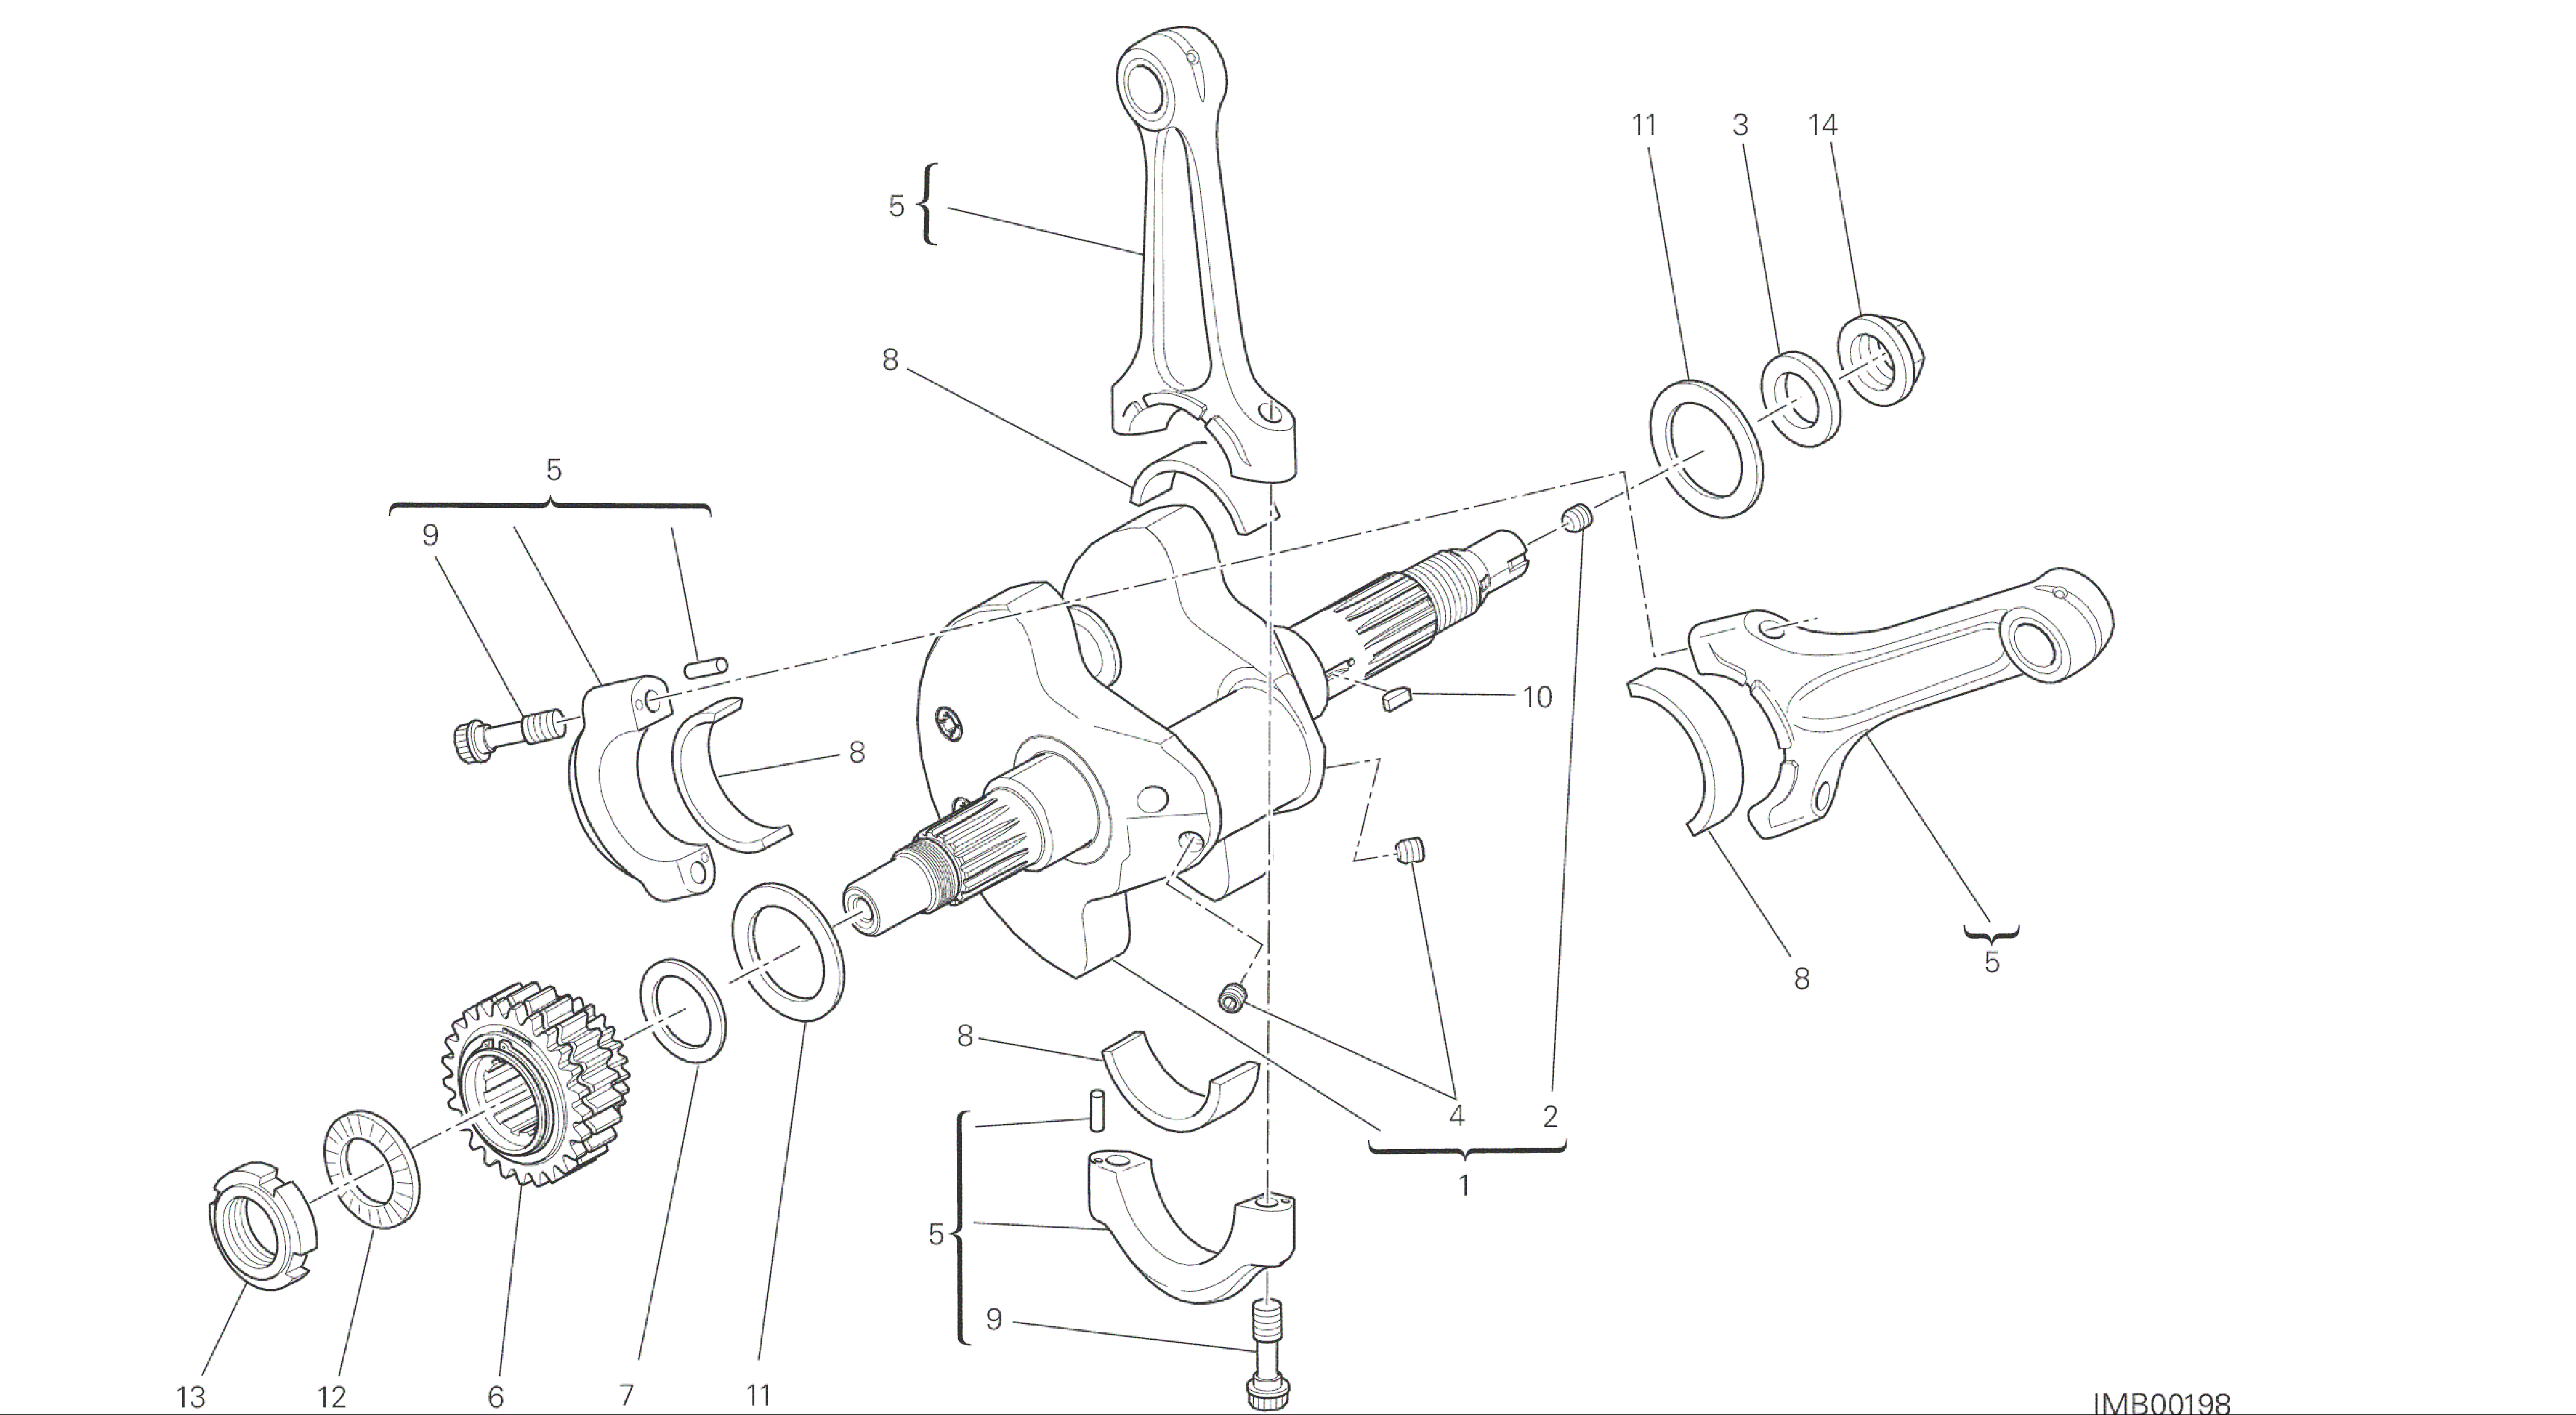 DRAWING 006 - CONNECTING RODS [MOD:M 1200]GROUP ENGINE